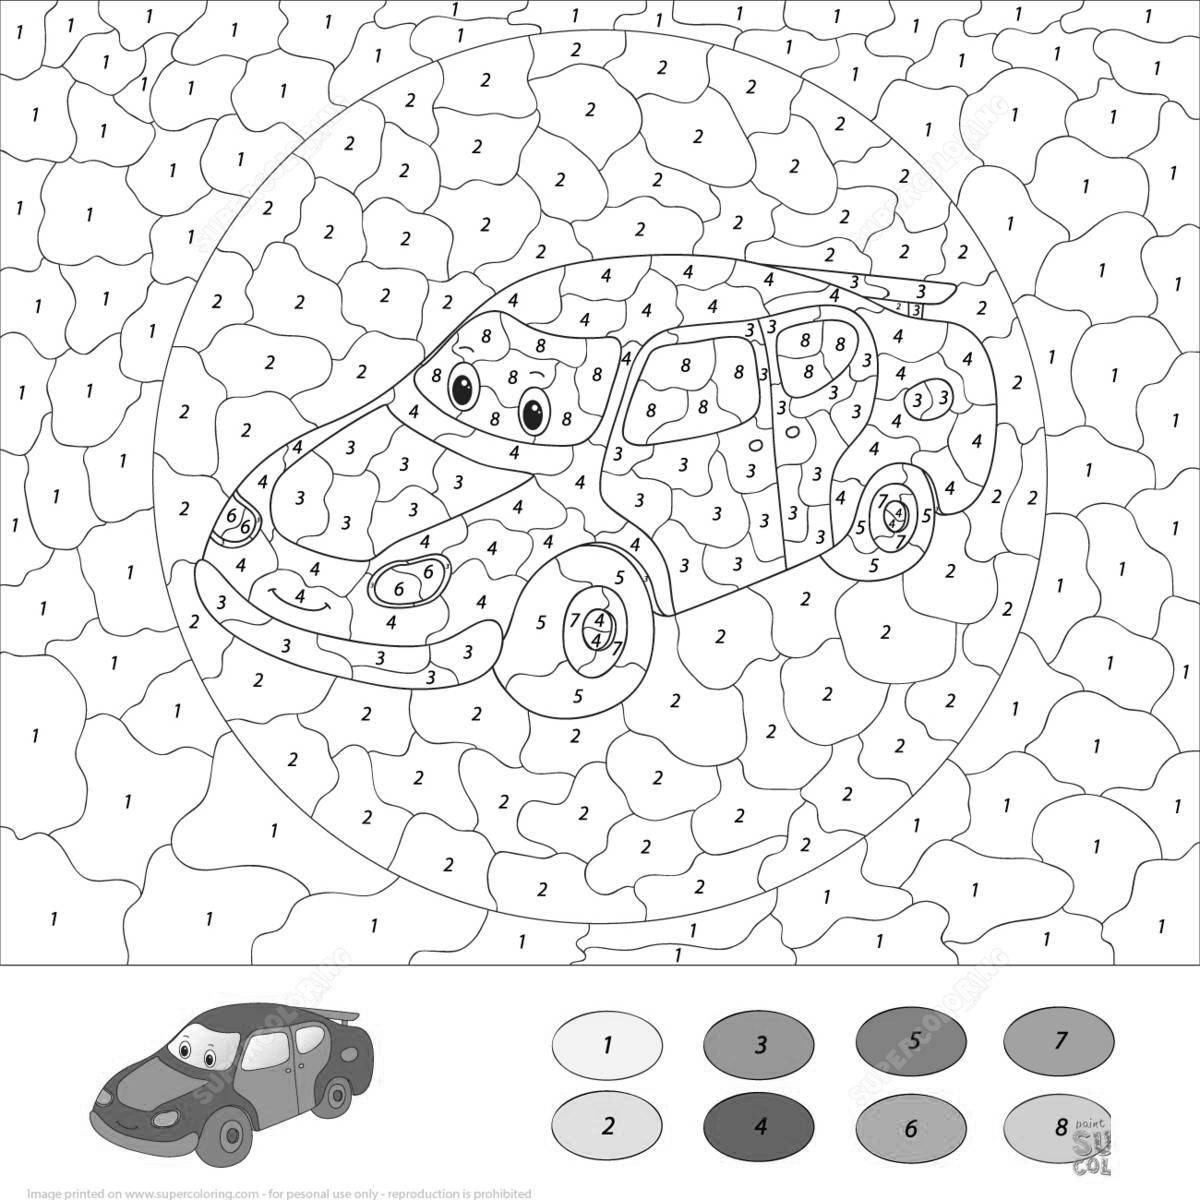 Fabulous car number coloring book for children 5-6 years old